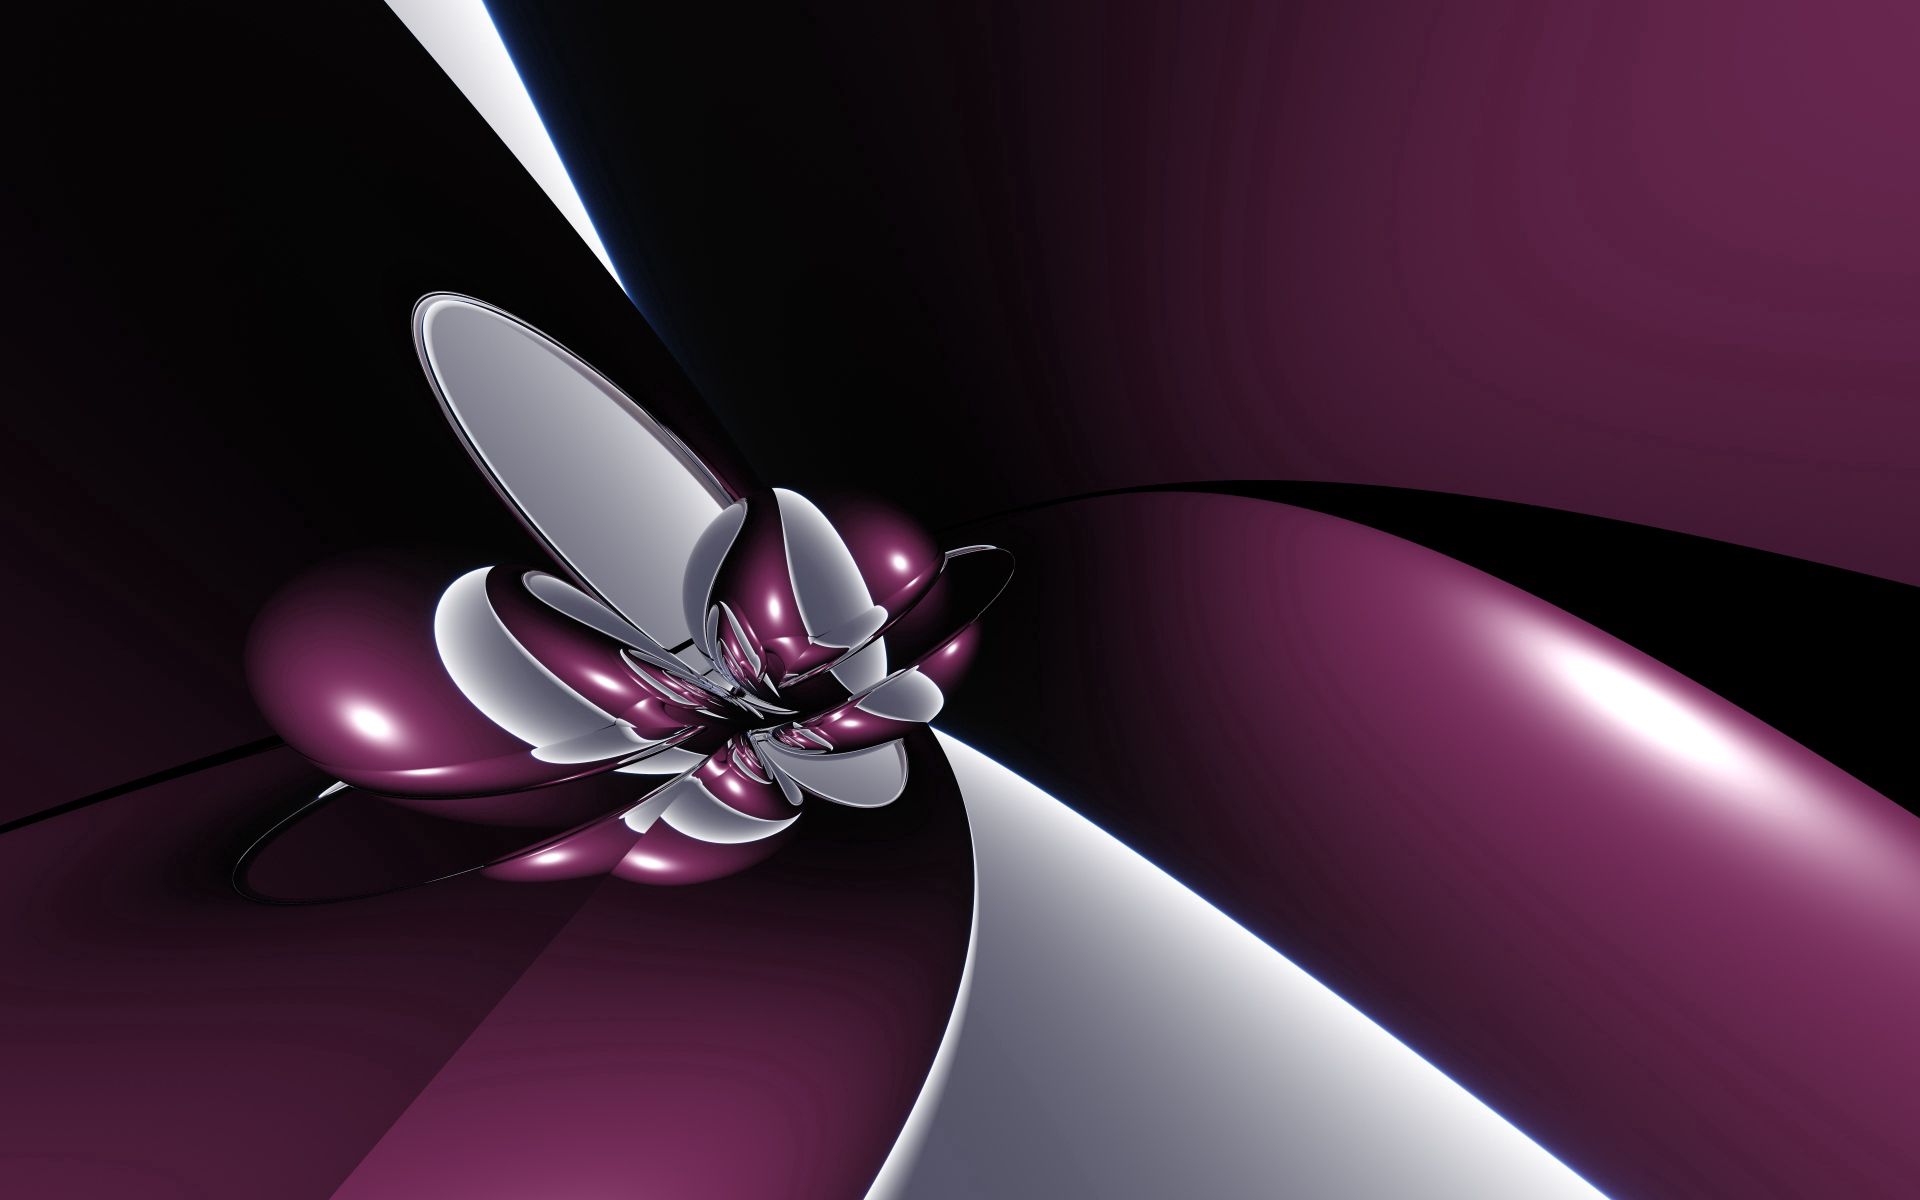 86987 1280x1024 PC pictures for free, download violet, abstract, form, purple 1280x1024 wallpapers on your desktop